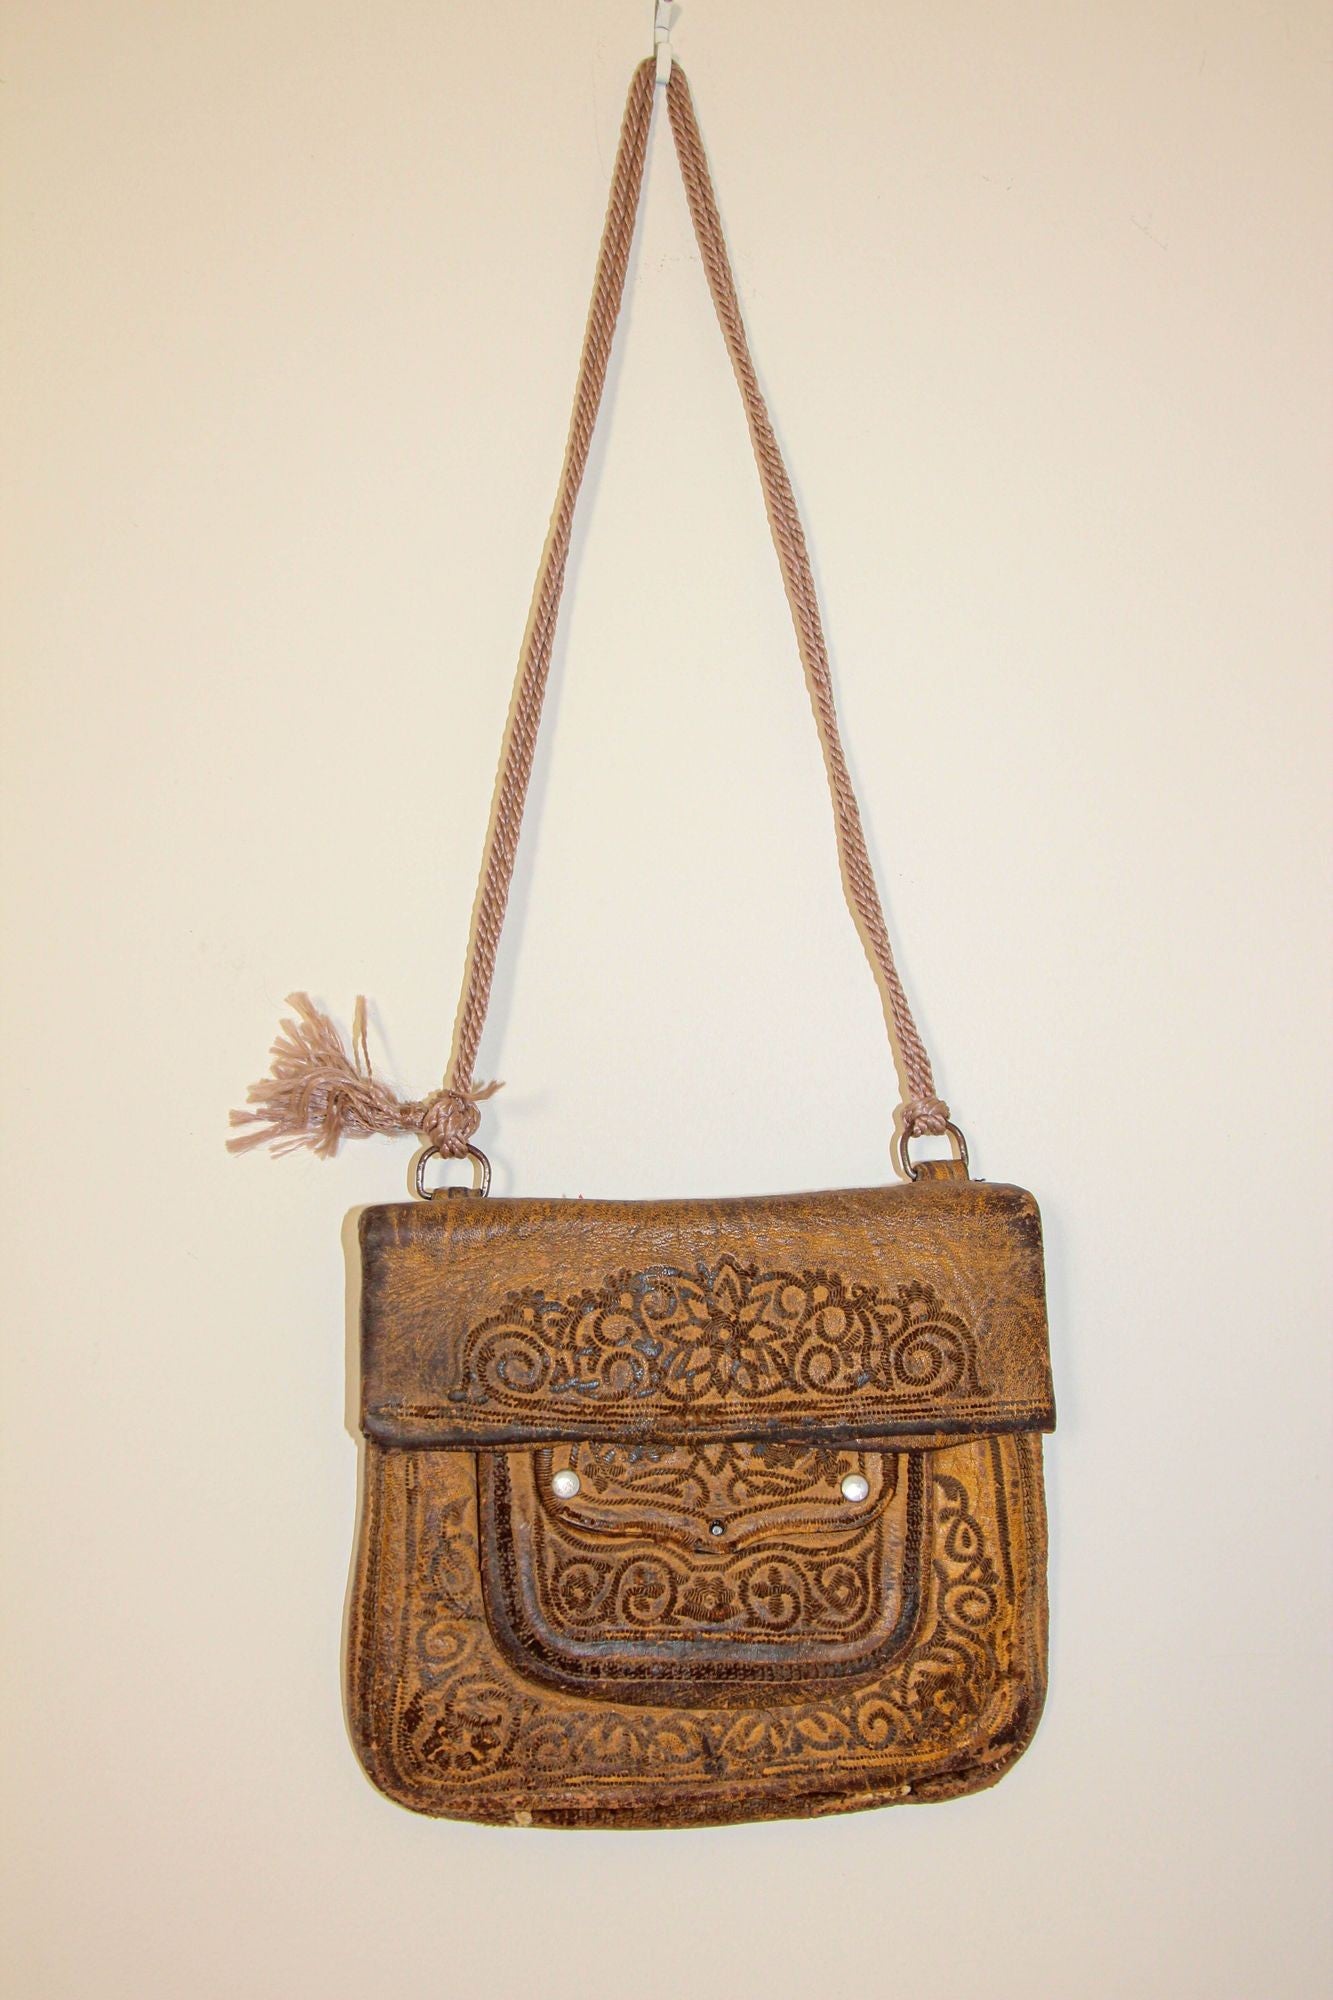 Buy 70s Vintage Hand Tooled Leather Bag Online in India - Etsy